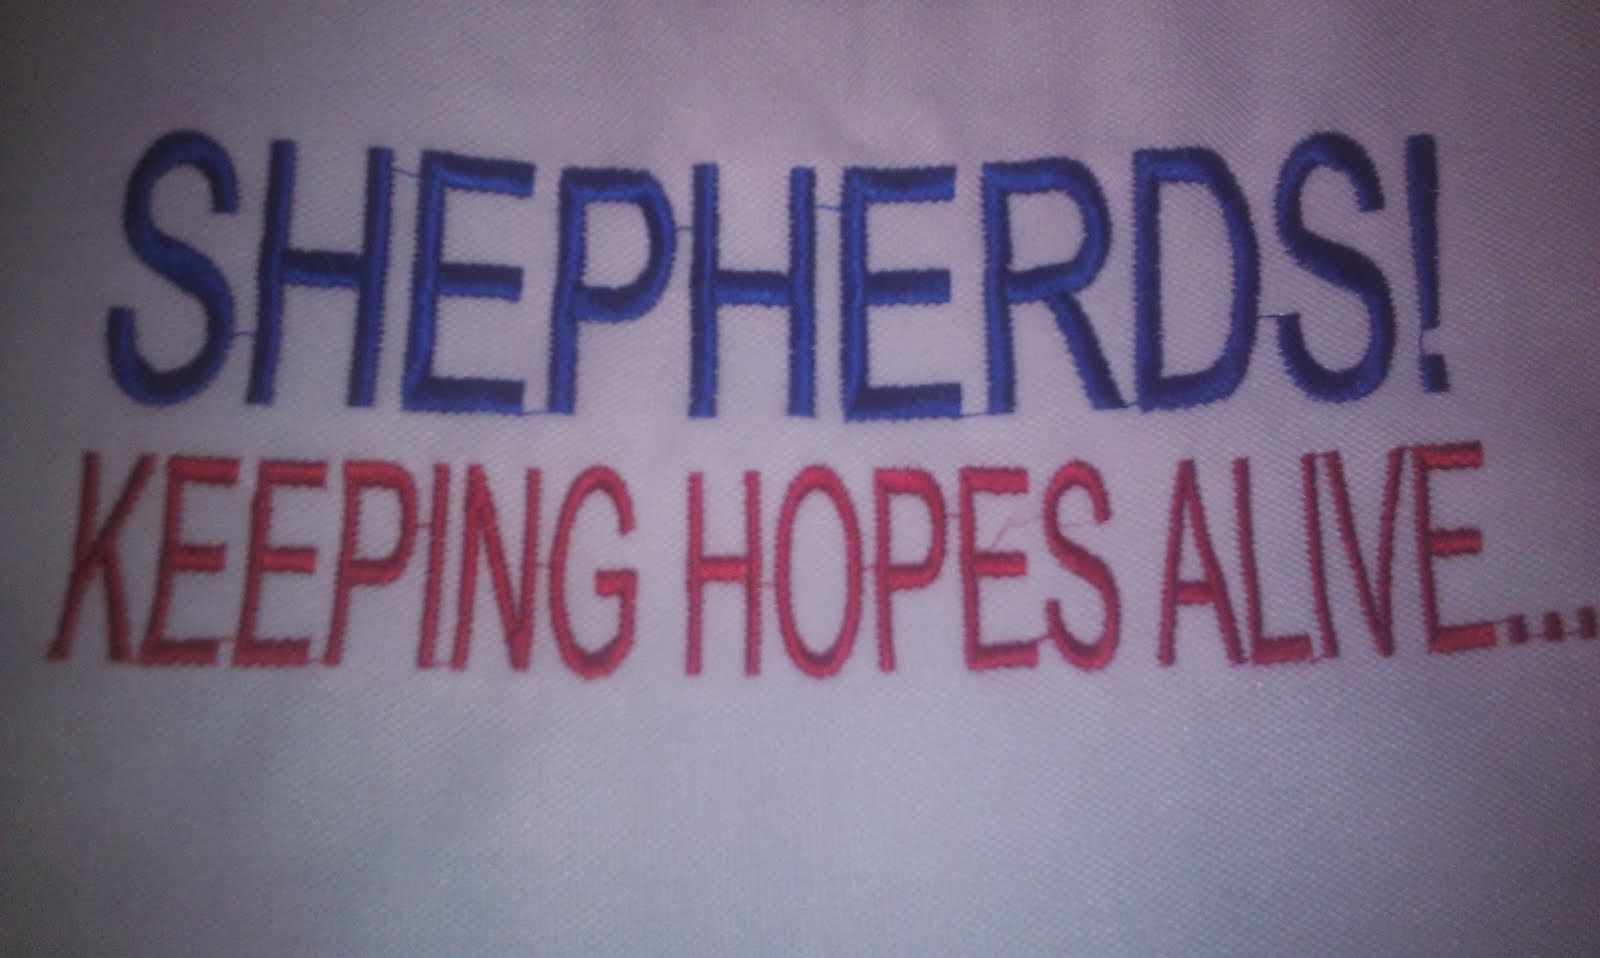 At the back of the Shepherds T Shirts